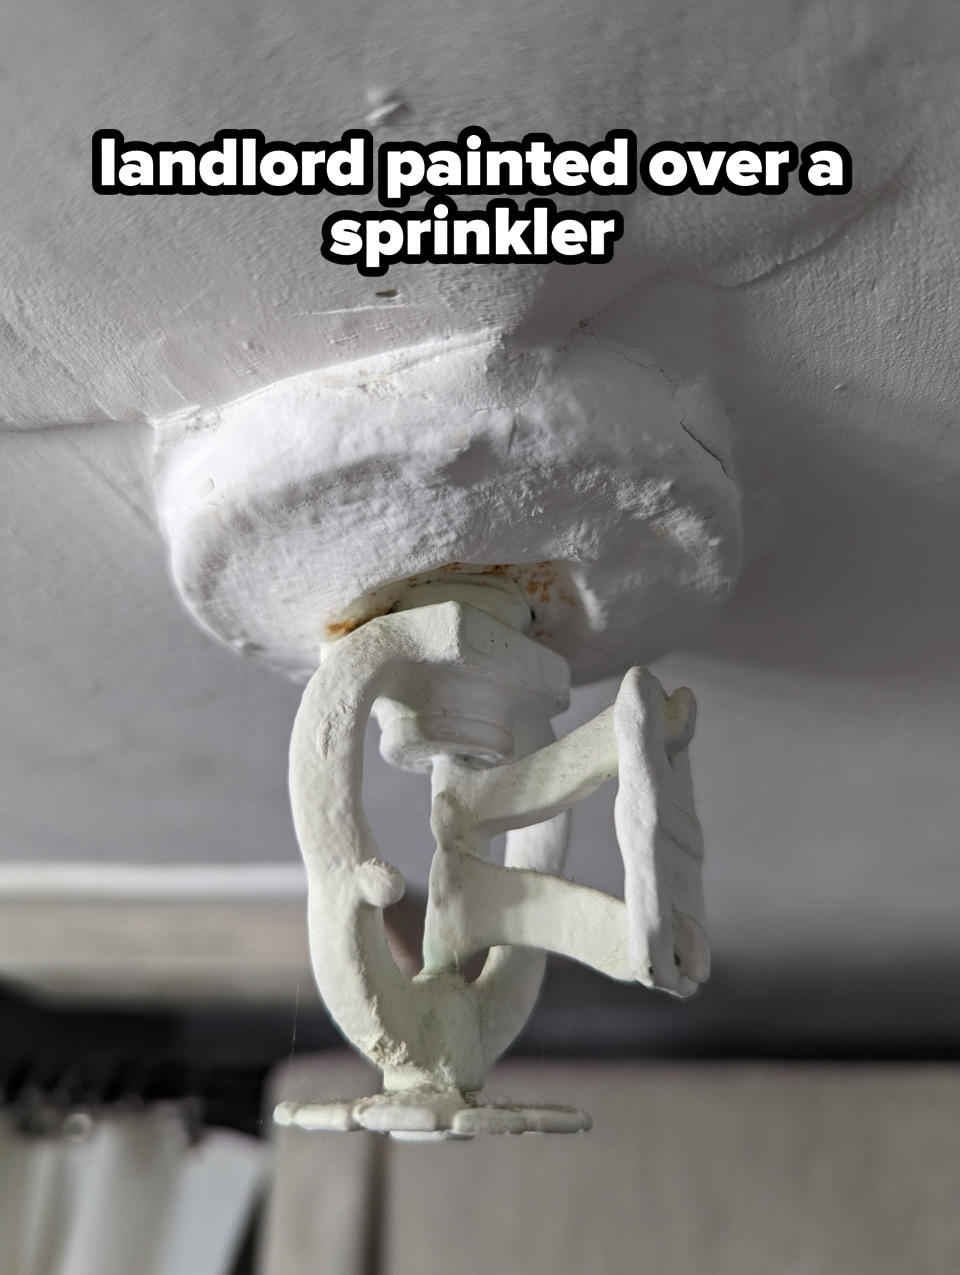 sprinkler that has been painted over